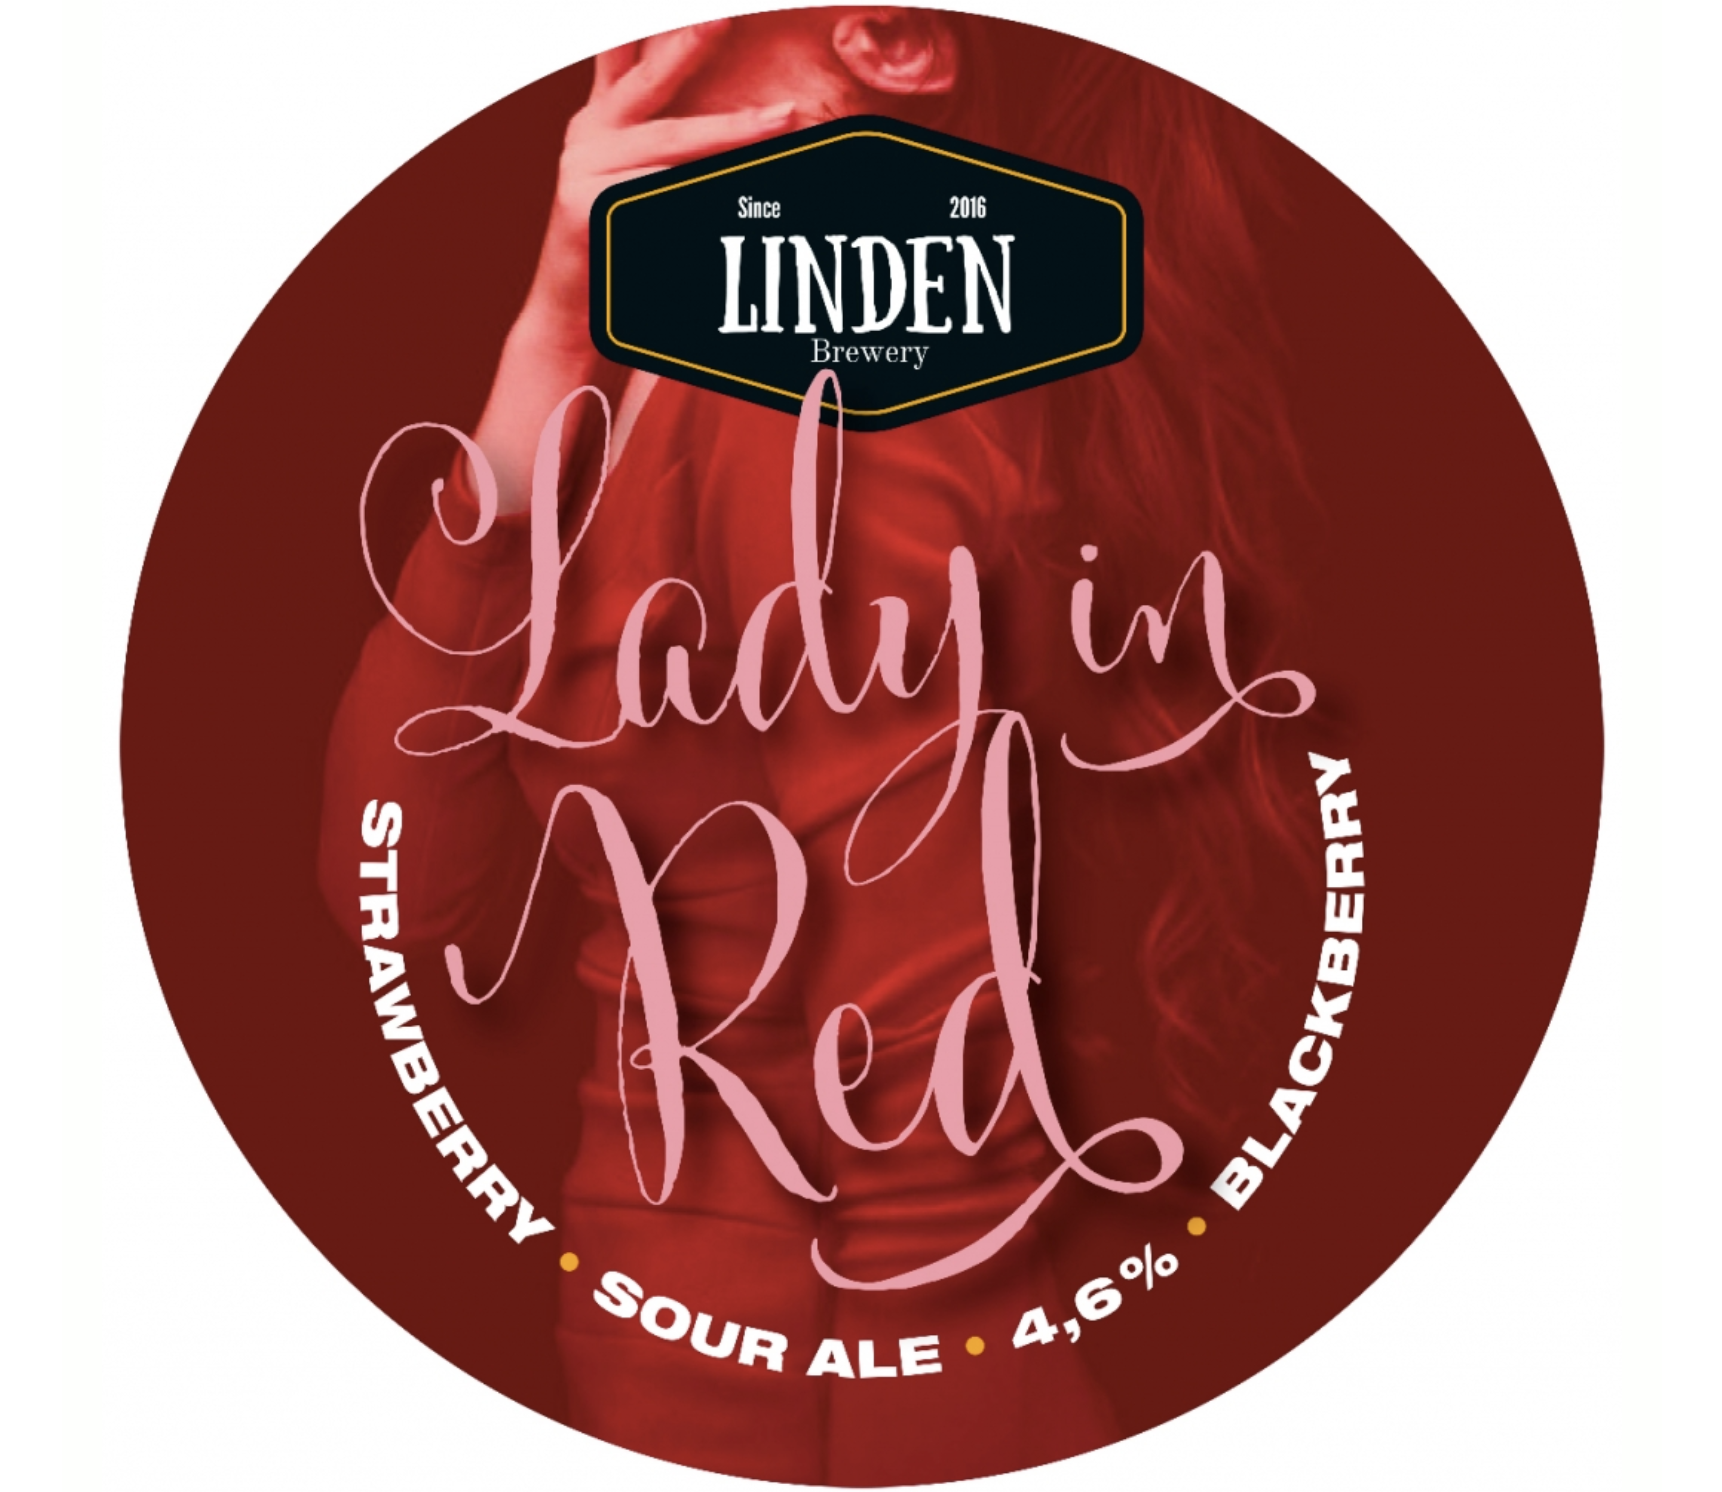 Linden Brewery Lady in Red Berry Sour Ale 4,6% - 0,33l bottle